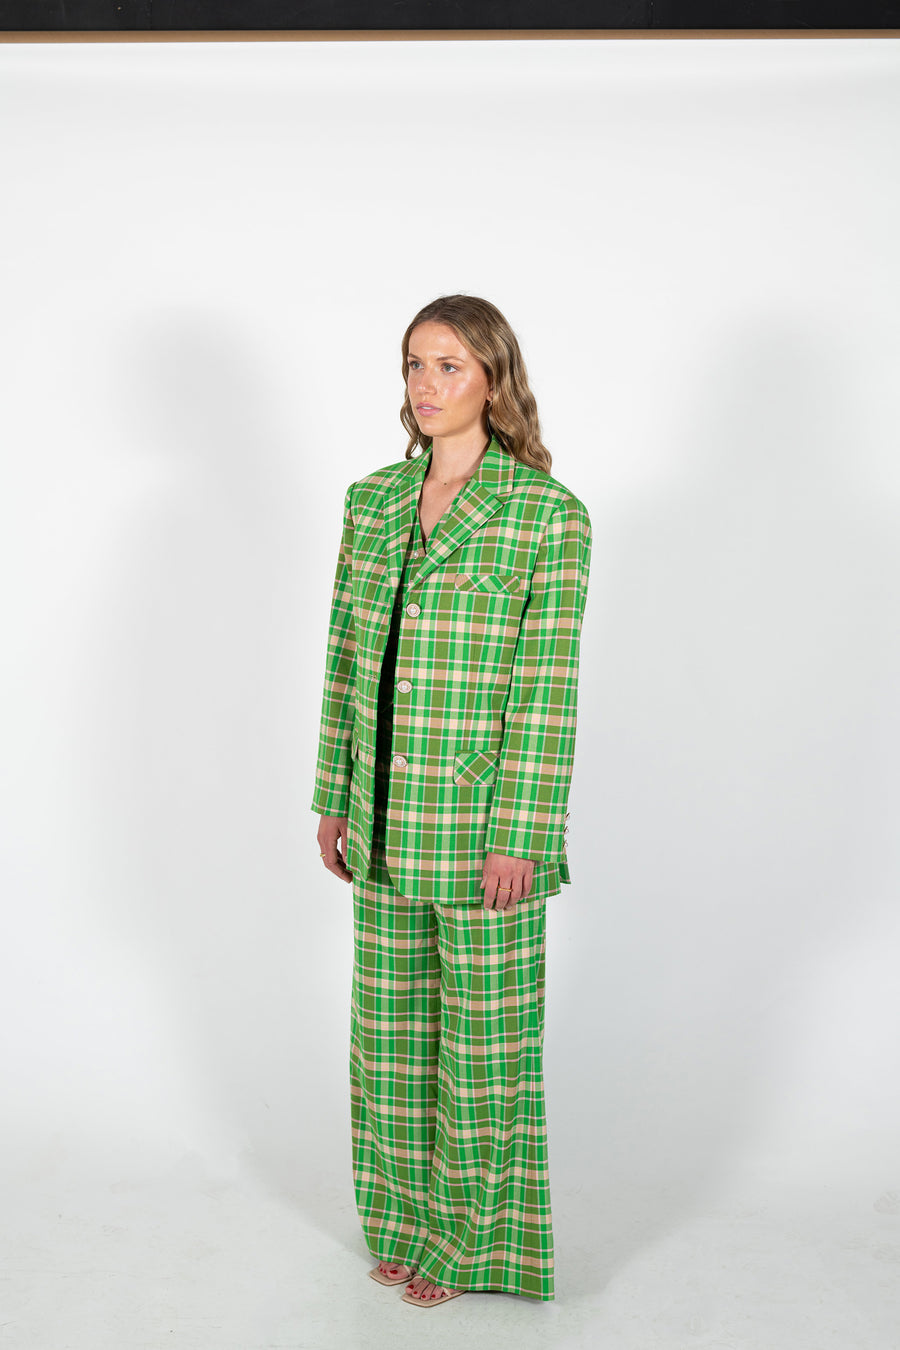 House of Campbell's vibrant green Verdant Suit Set.